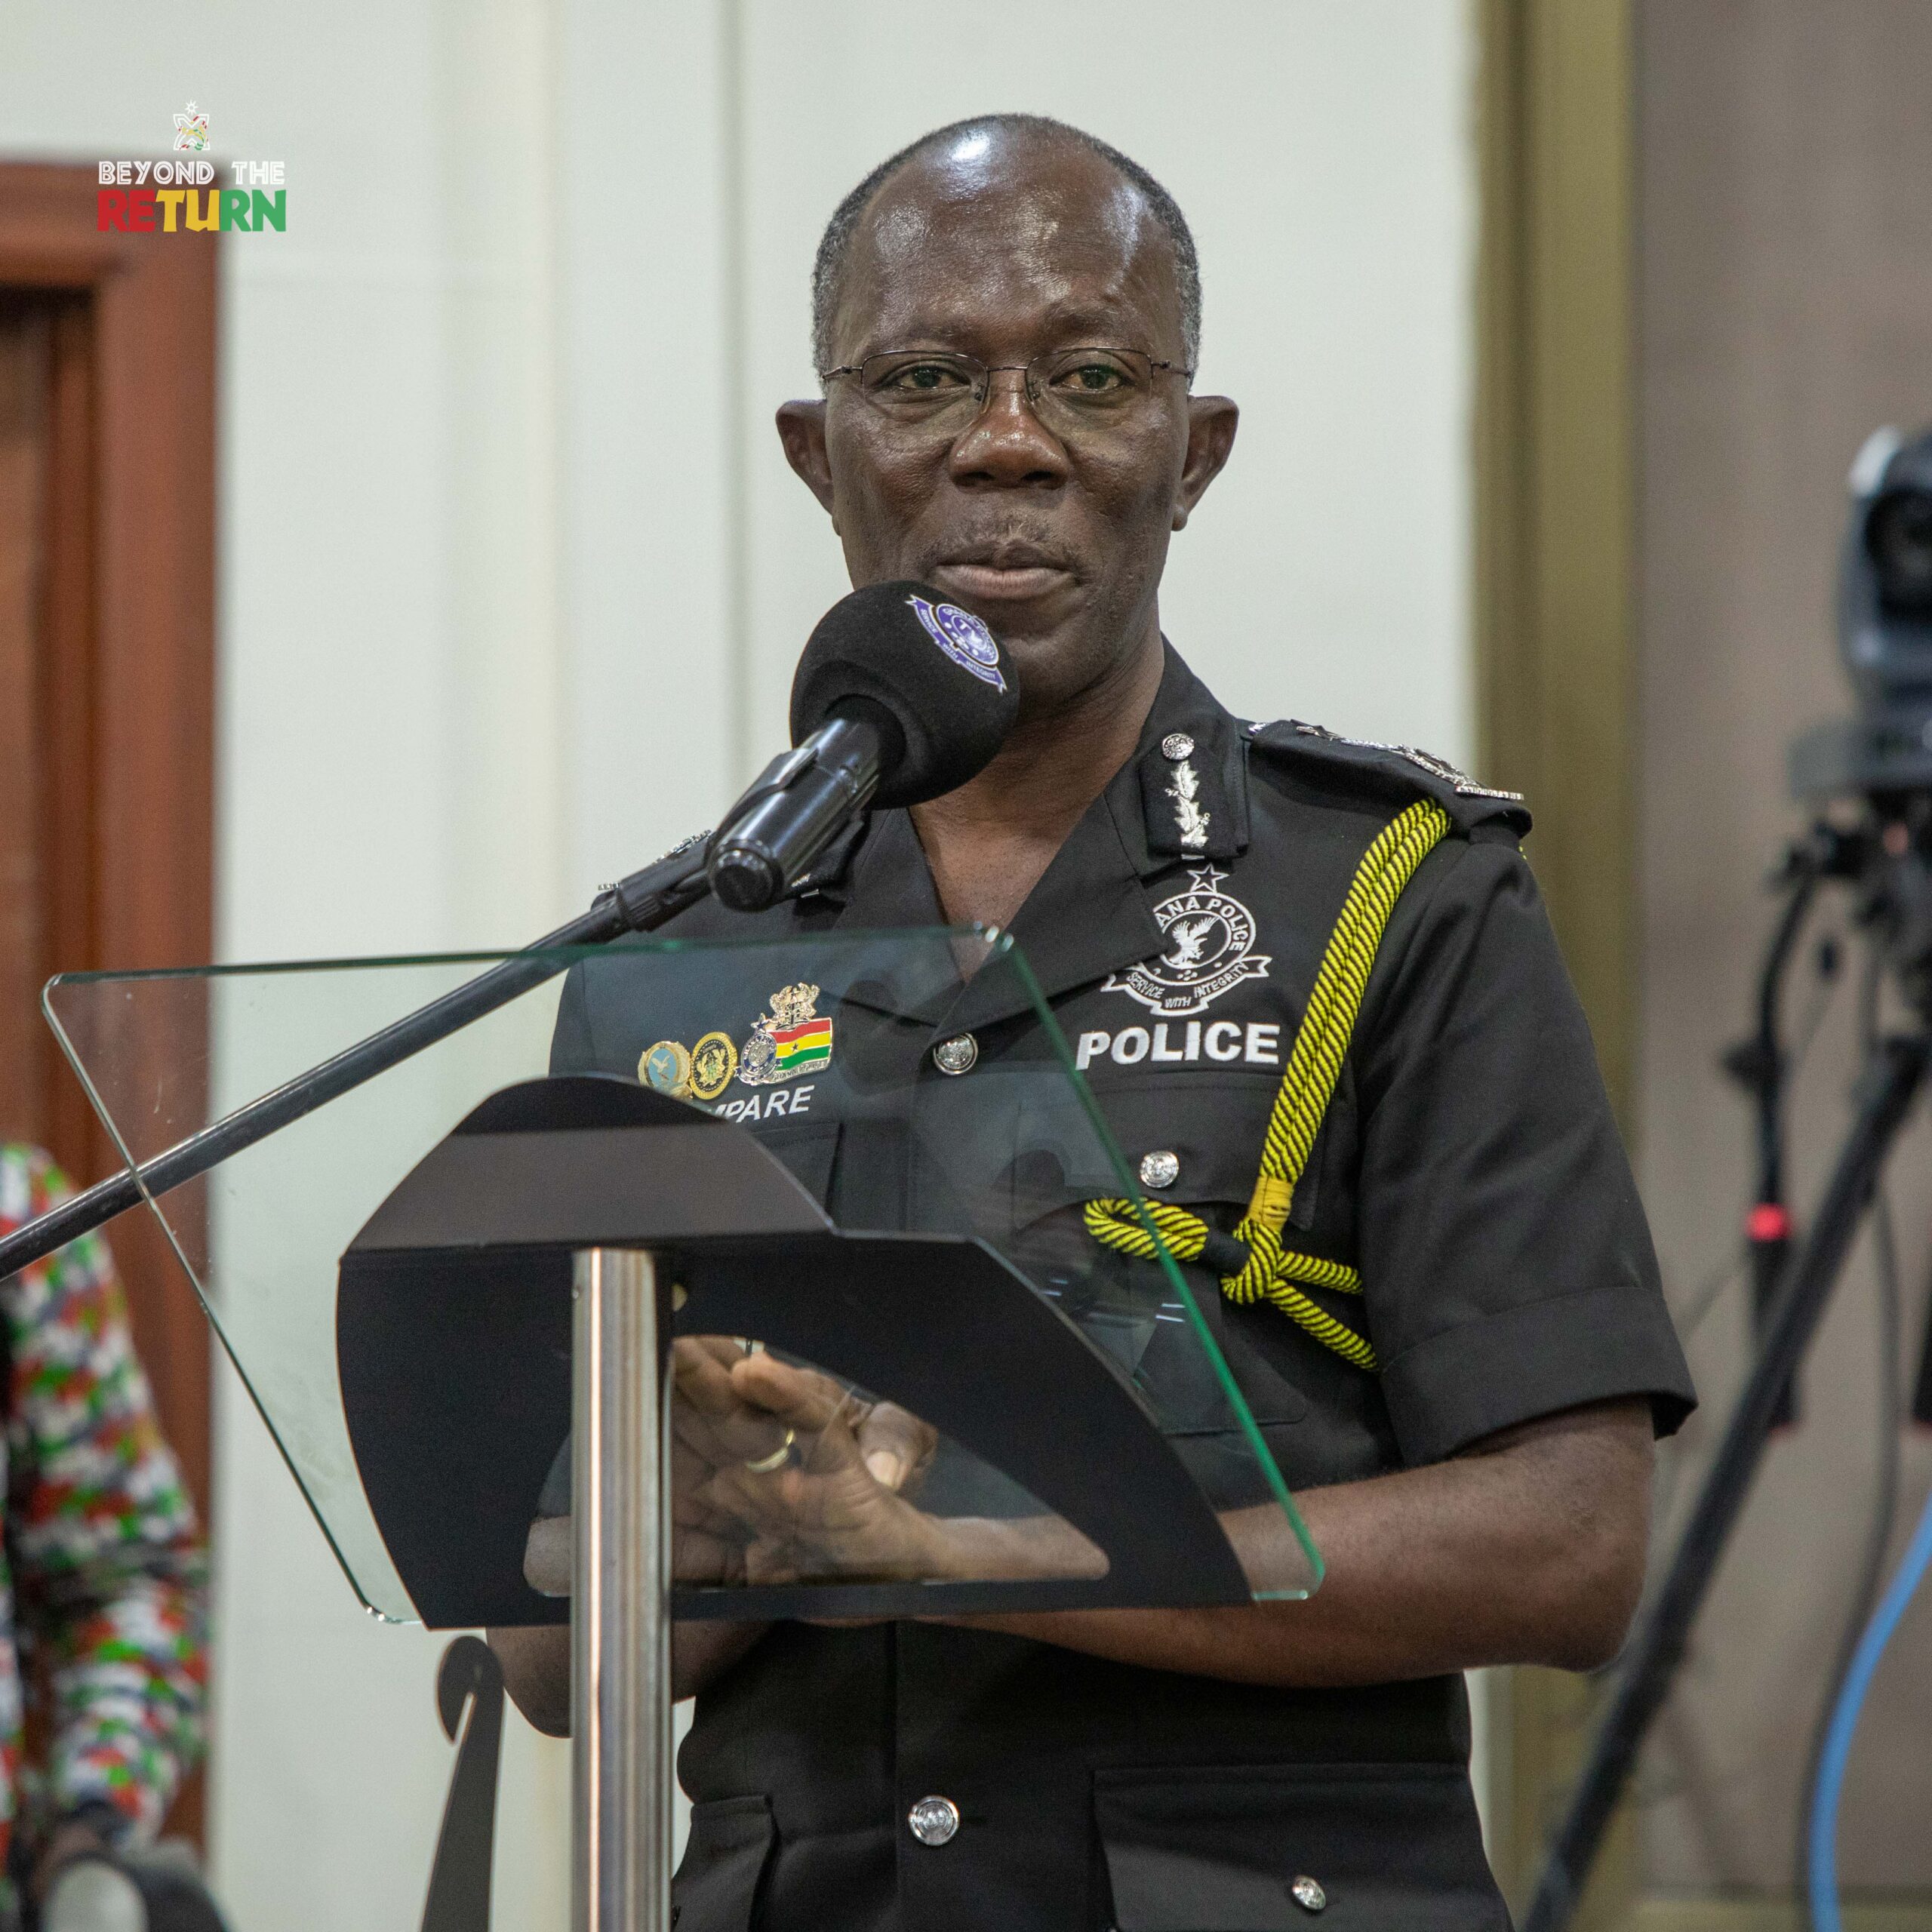 You are currently viewing Ghana Police Headquarters Collaborates with Tourism Authority and Beyond the Return Secretariat to Ensure Safety and Security during December in GH Festivities